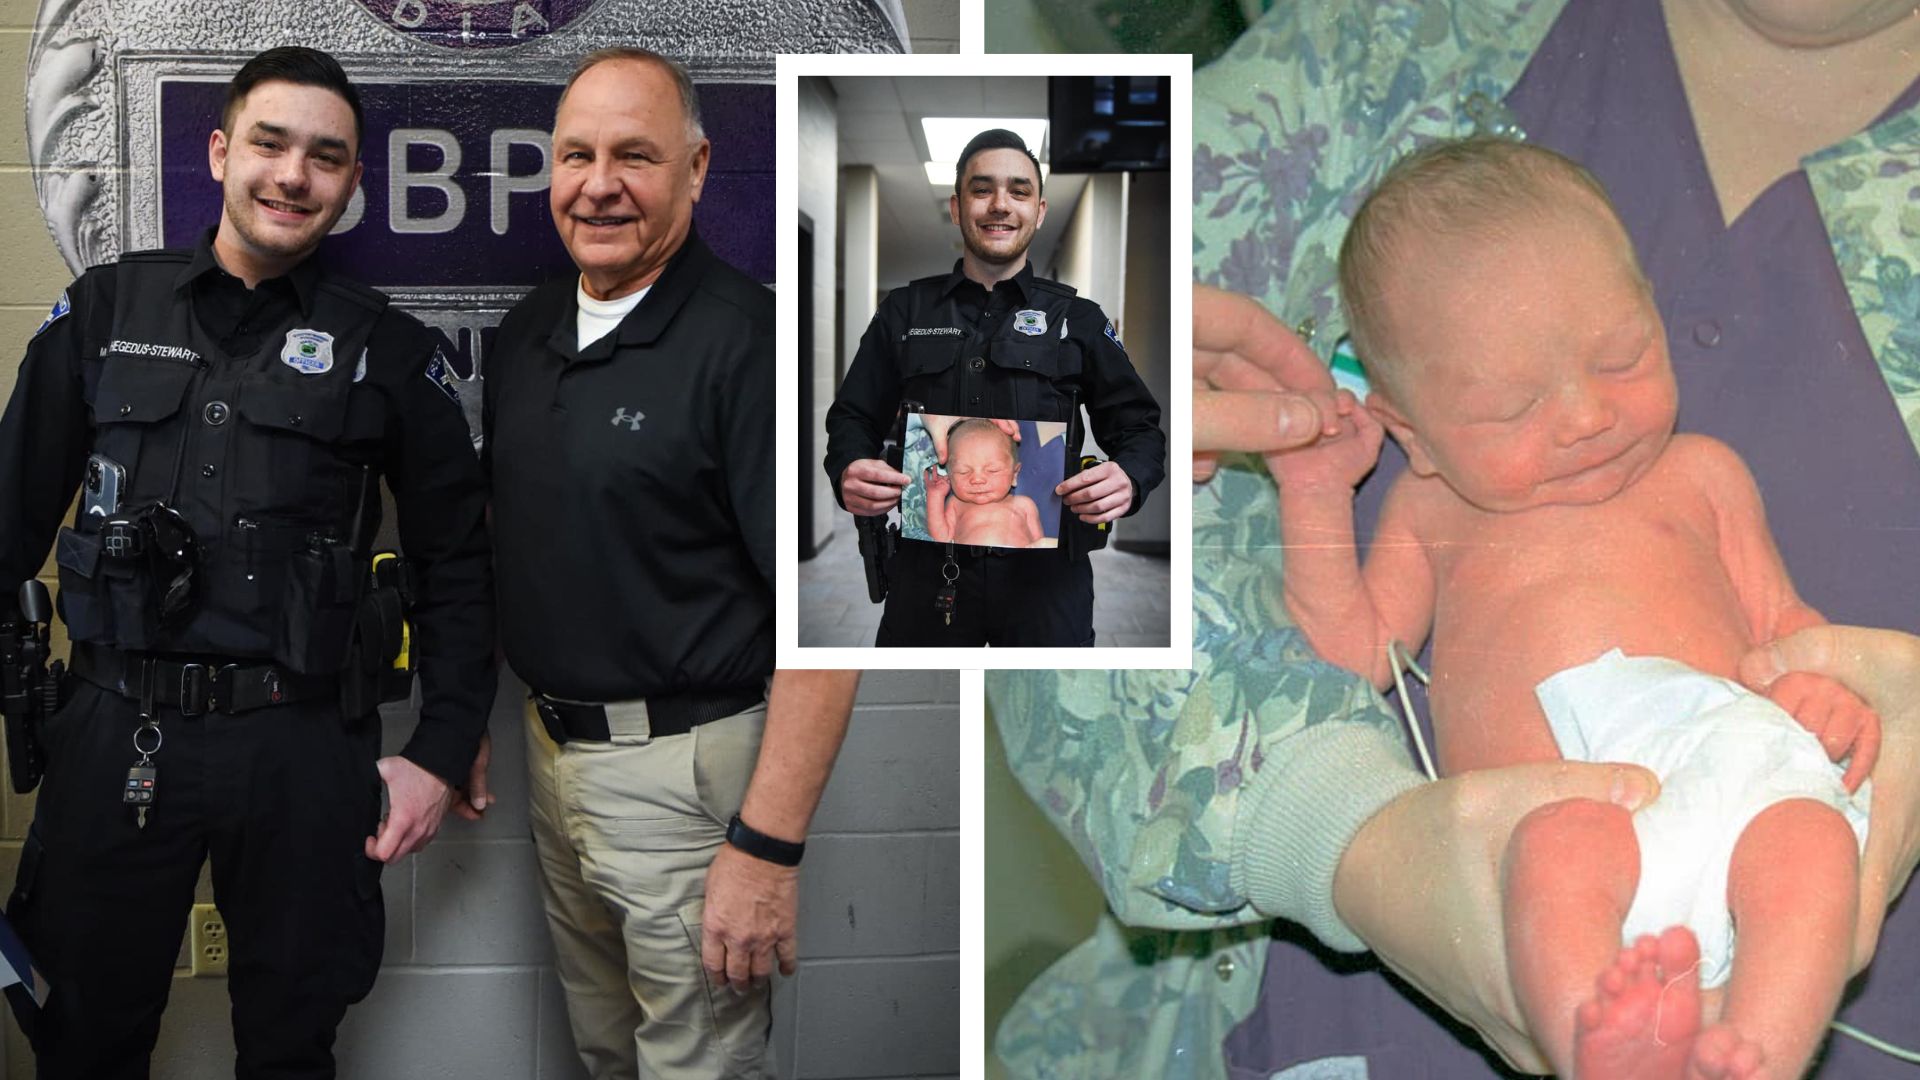 ‘Baby Jesus’: Indiana Cop Reunites with Ex-Officer Who Helped Rescue Him 24 Years Ago